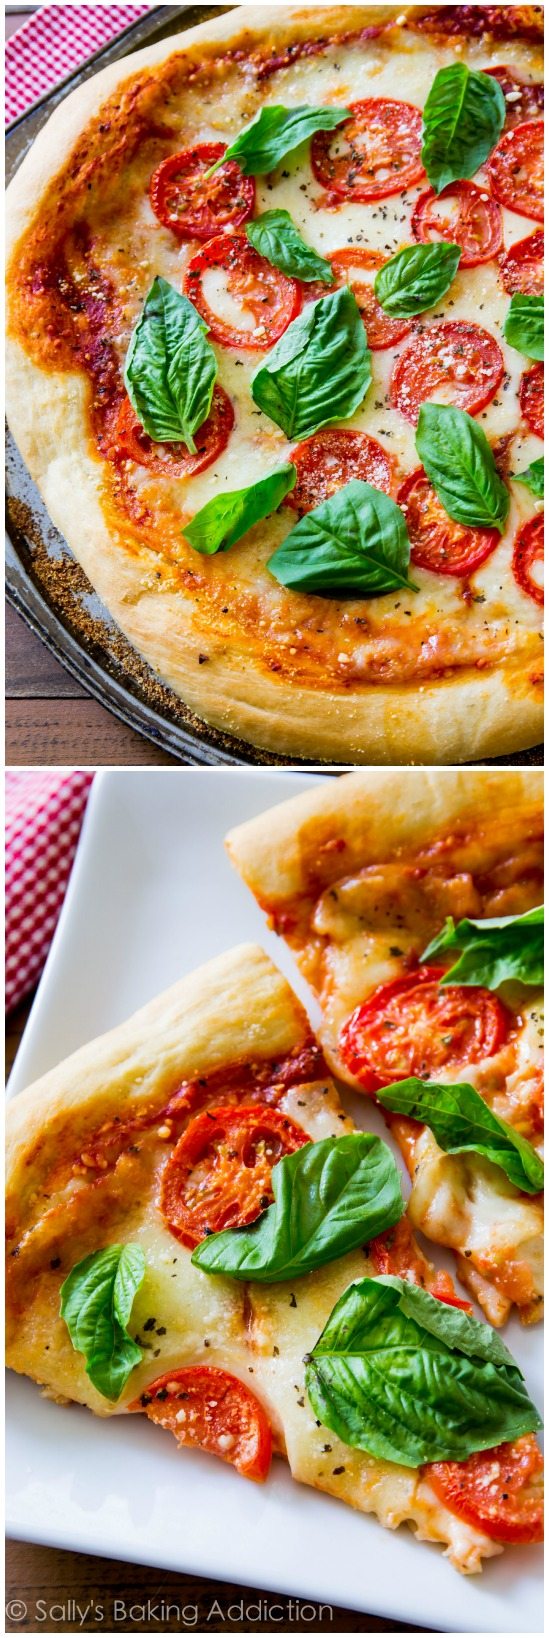 2 images of margherita pizza